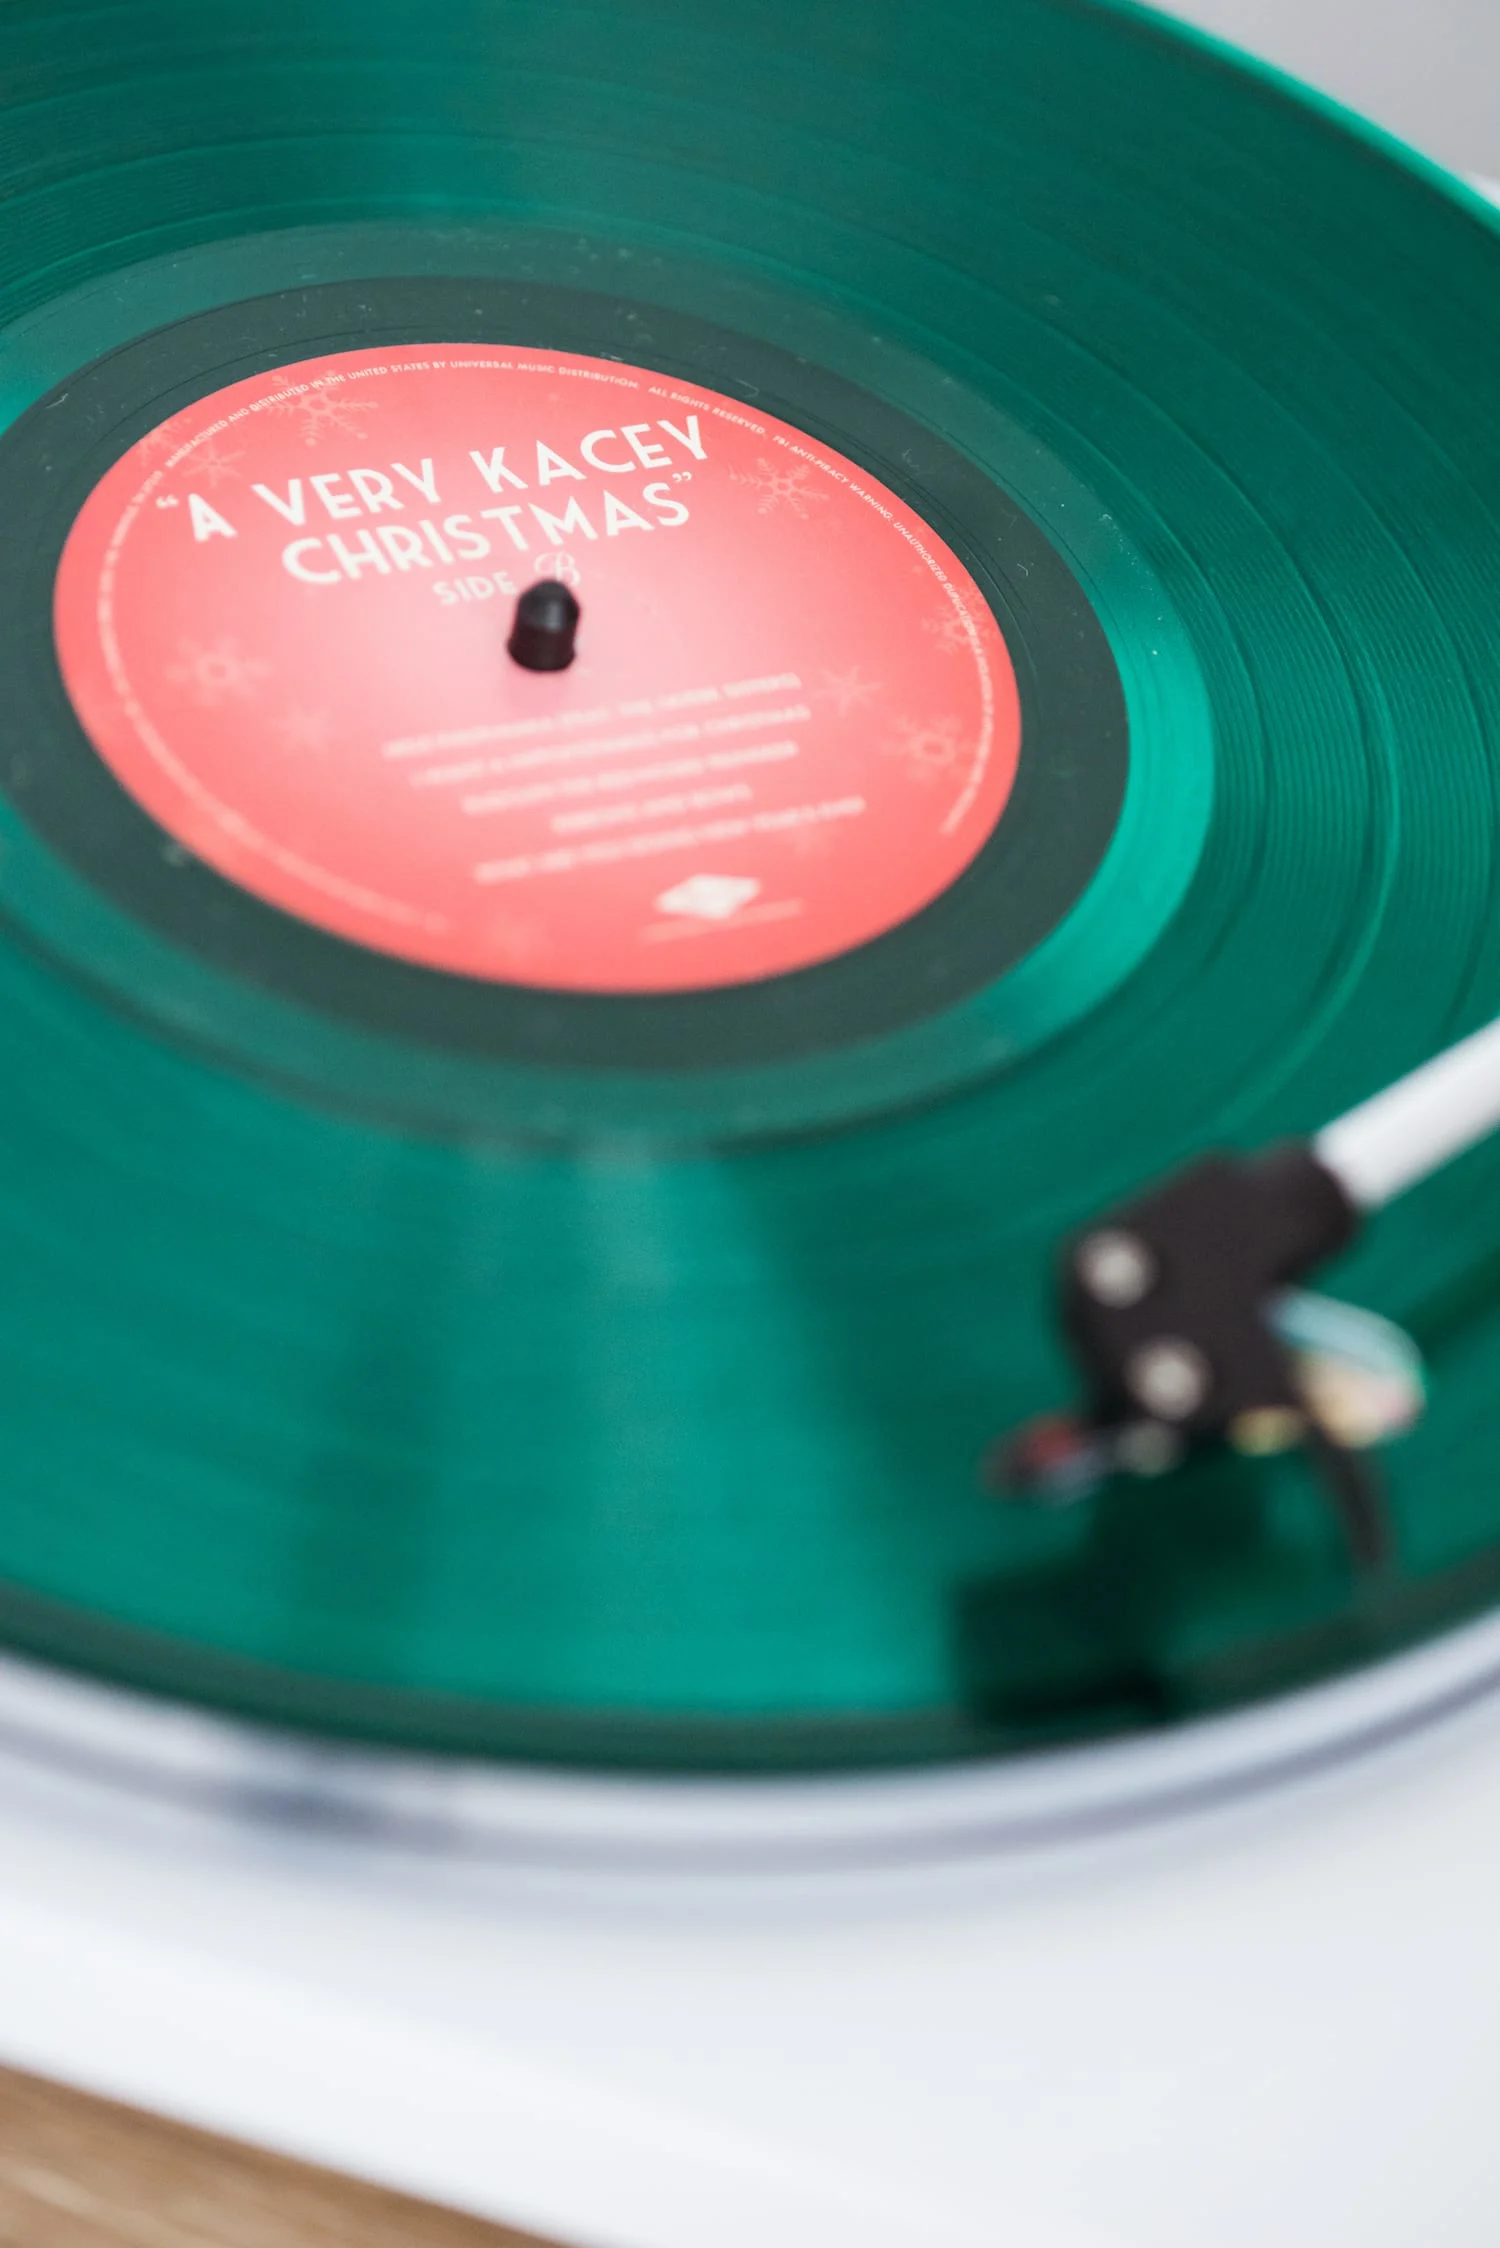 The Best Christmas Albums on Vinyl | Christmas music, holiday entertaining tips, Christmas recipes and more from entertaining blog @cydconverse